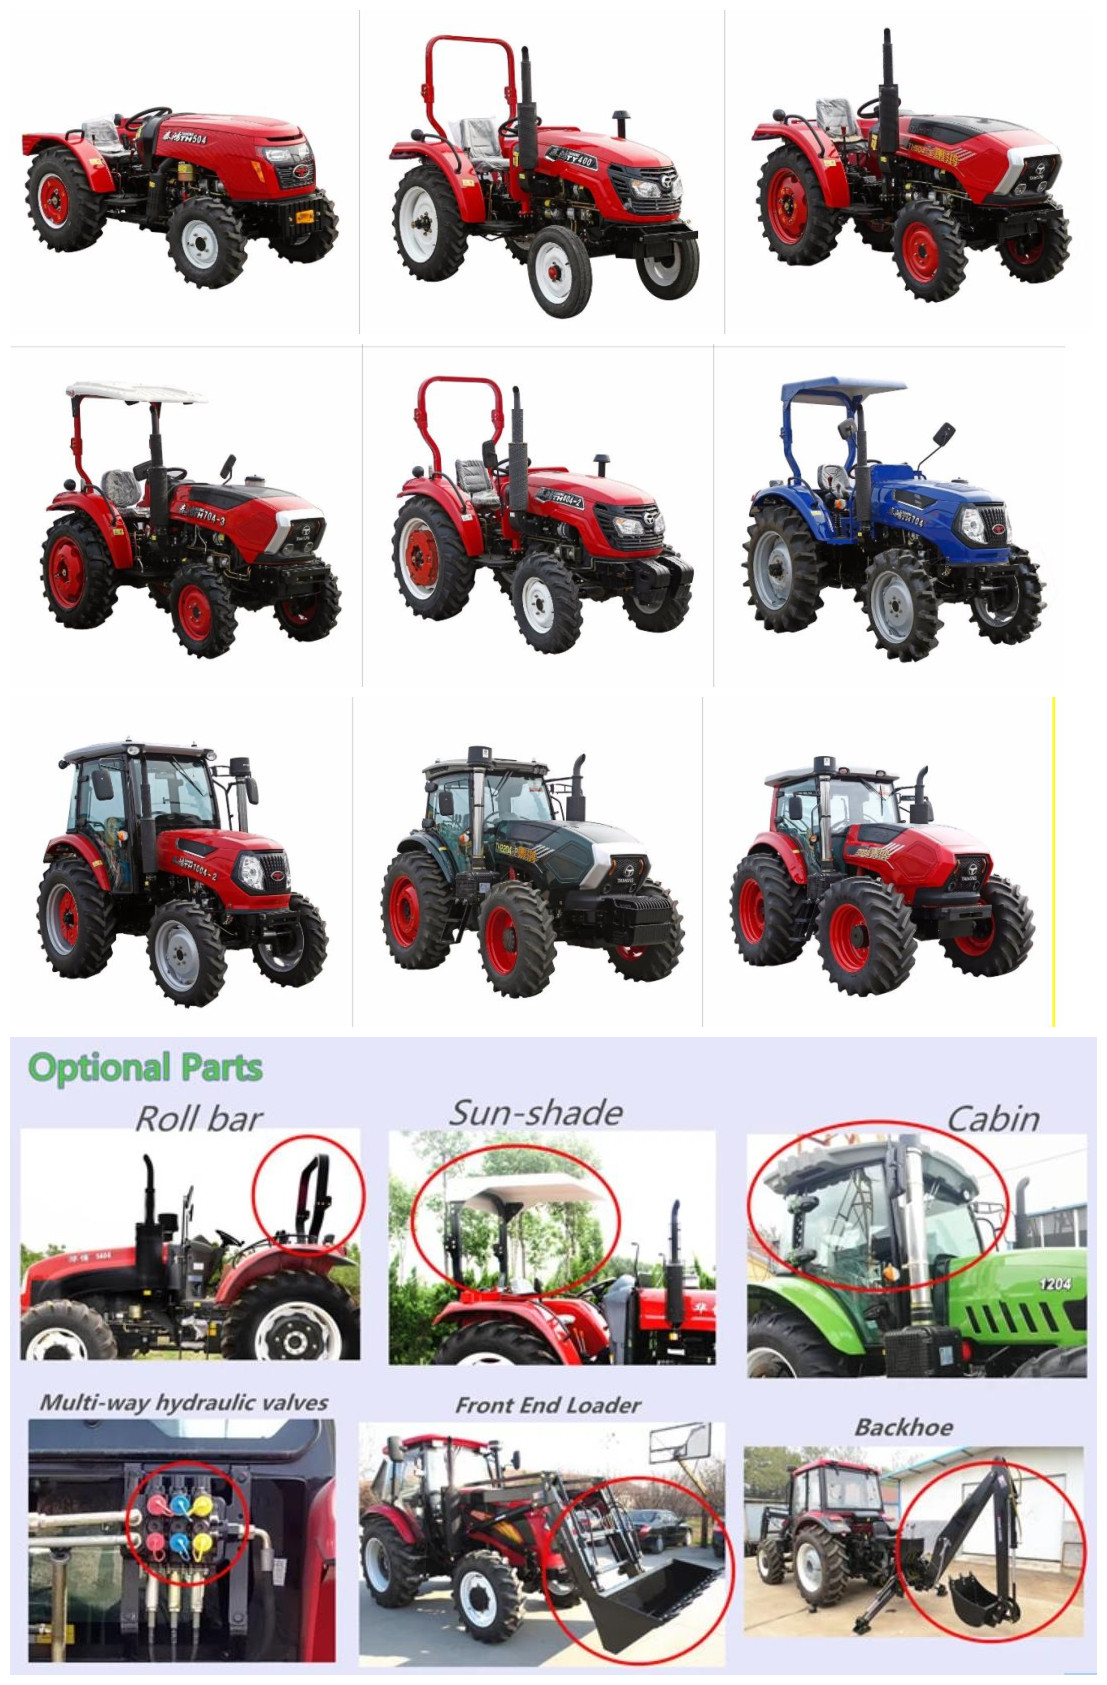 Factory Directly Supply 80HP 4WD Mini Garden Walking Agricultural Farm Tractor